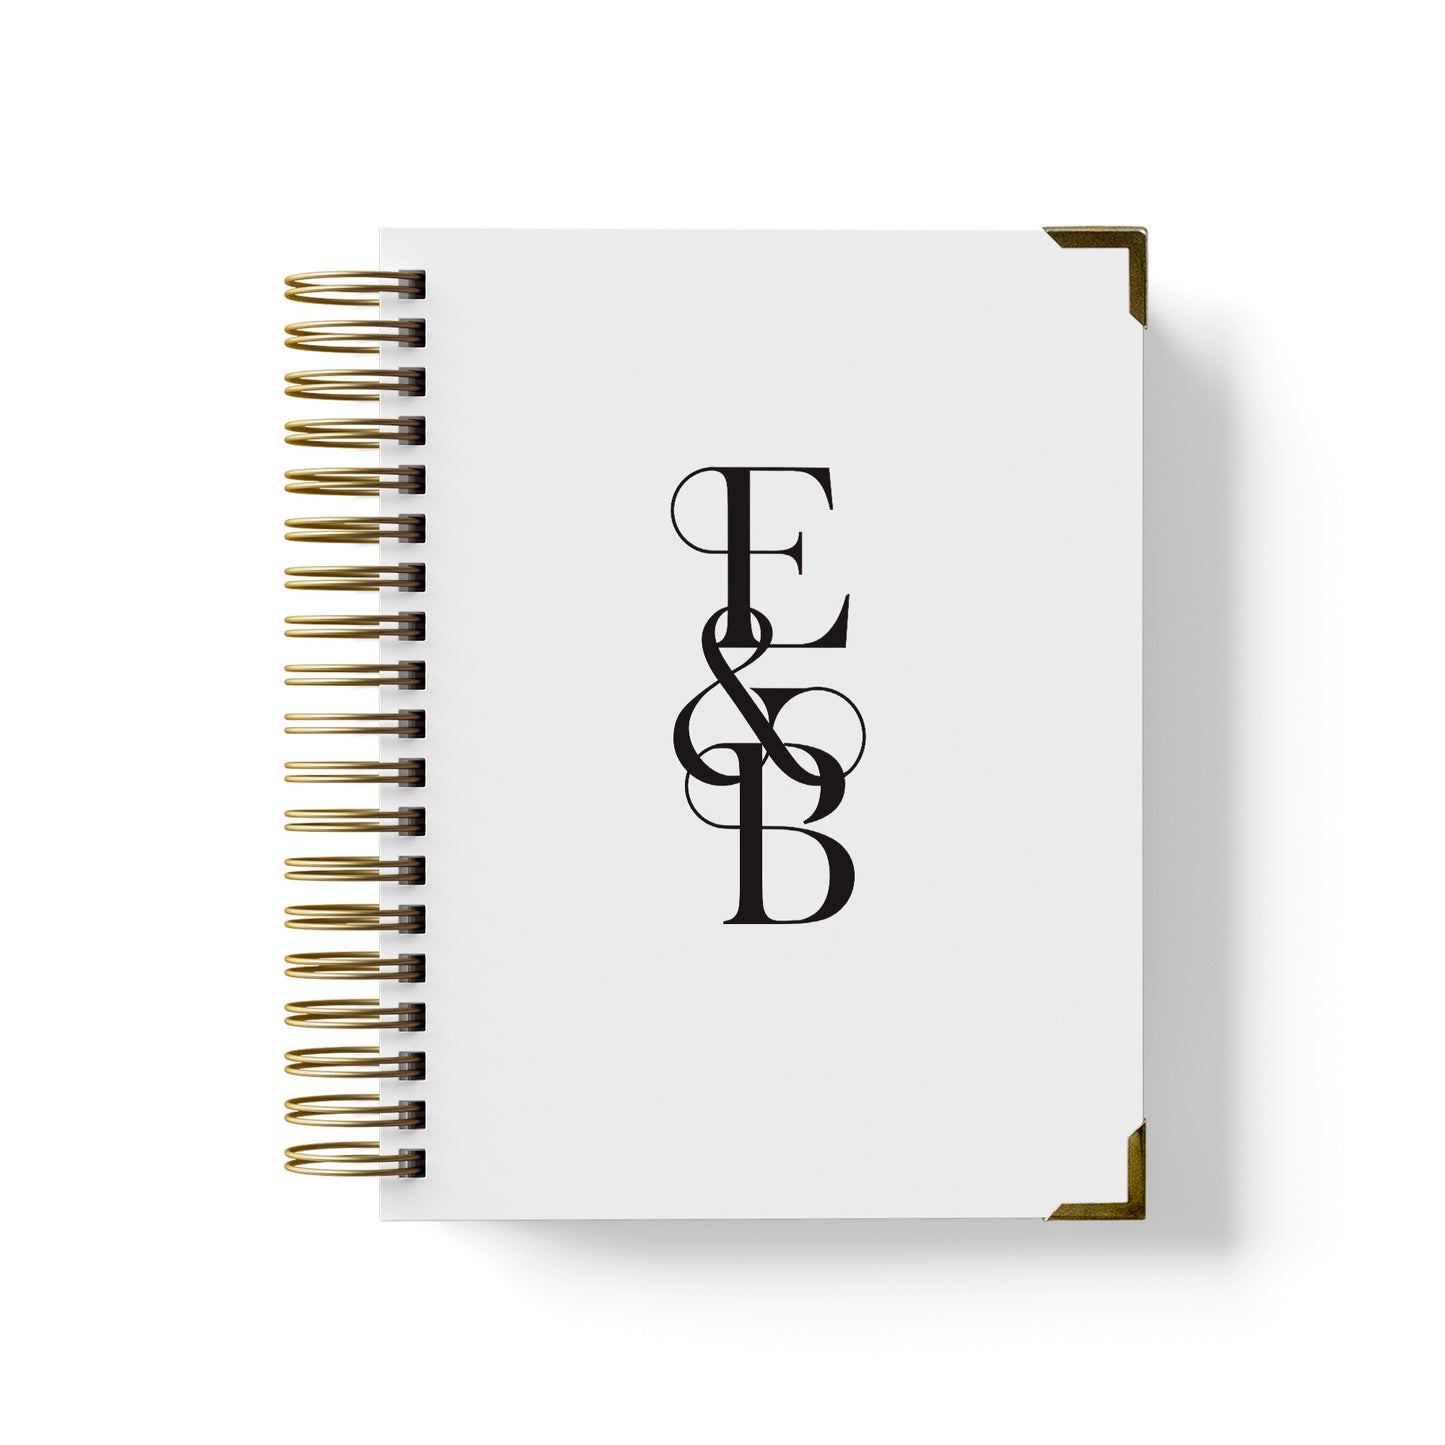 Our luxury wedding planner books are the best a bride can buy, featured in a bold monogram design